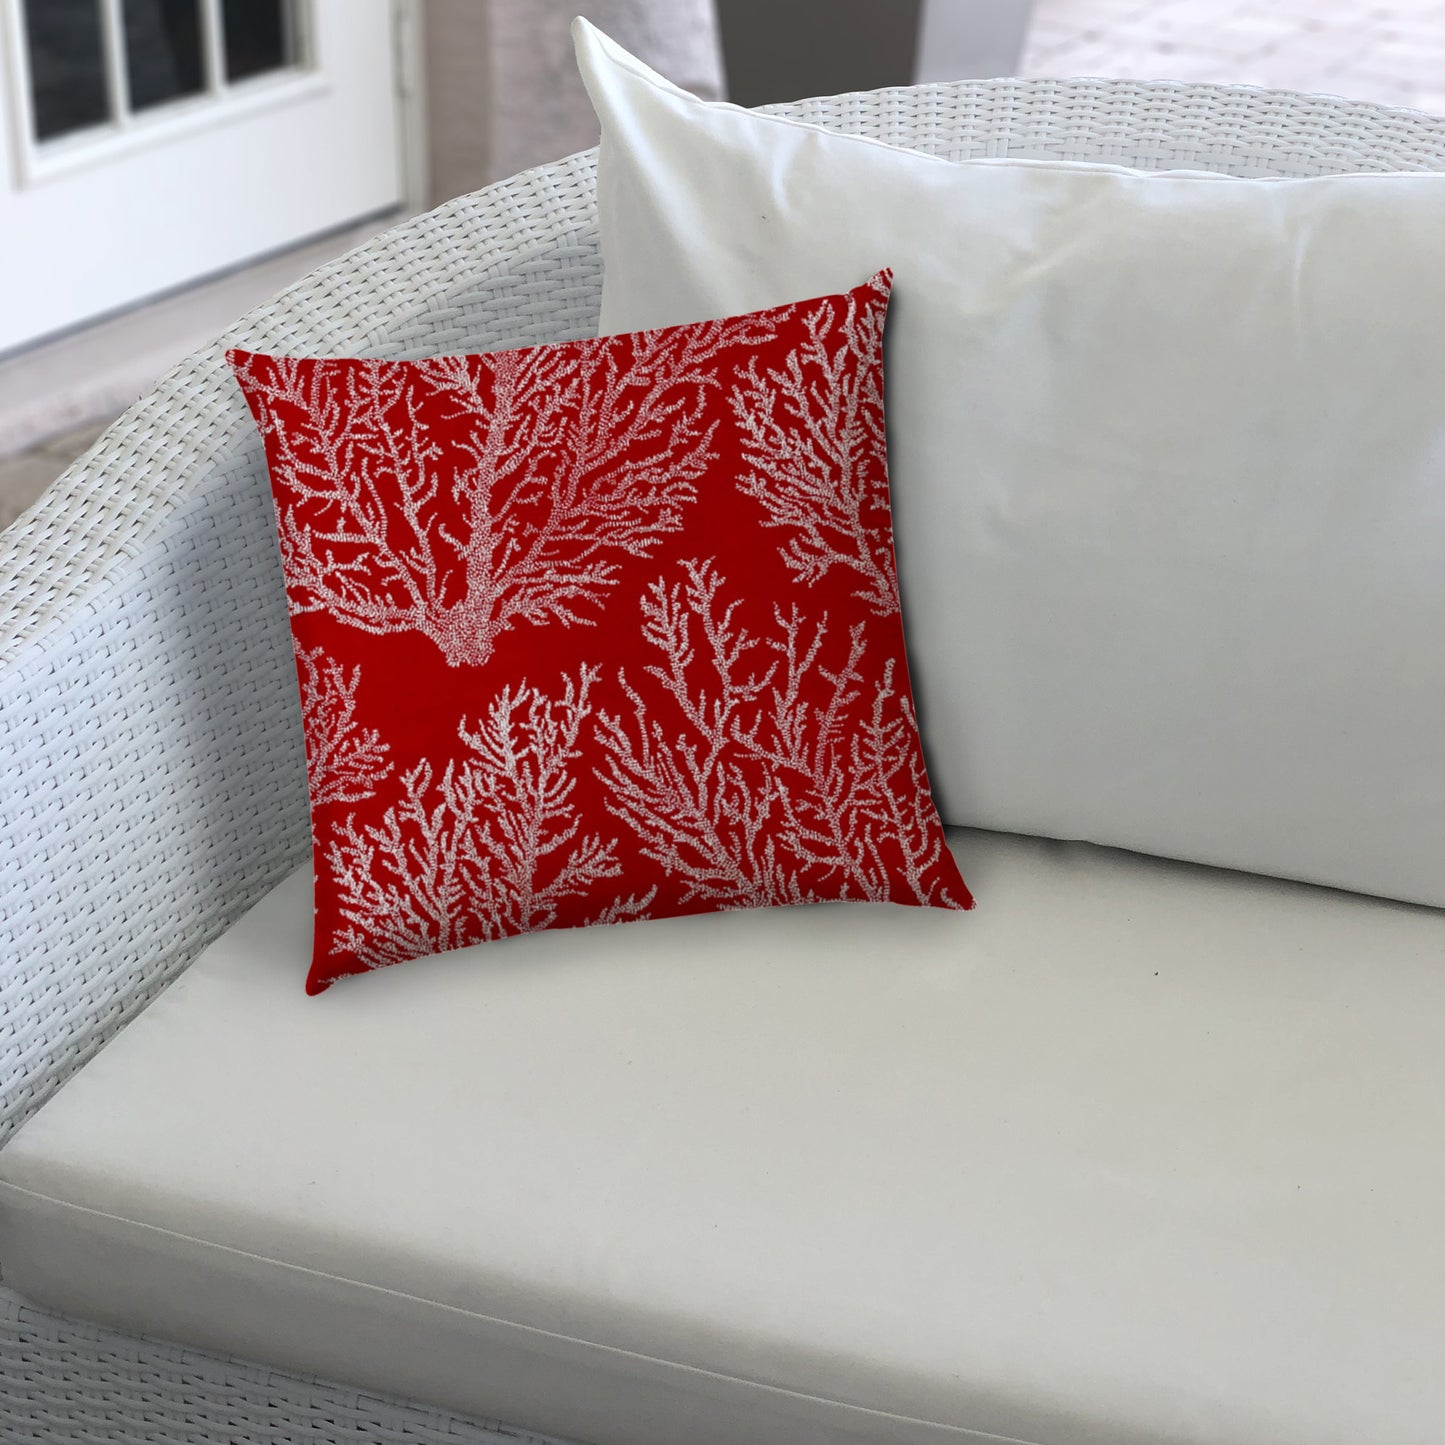 SEA OF CORAL Indoor/Outdoor Pillow - Sewn Closure